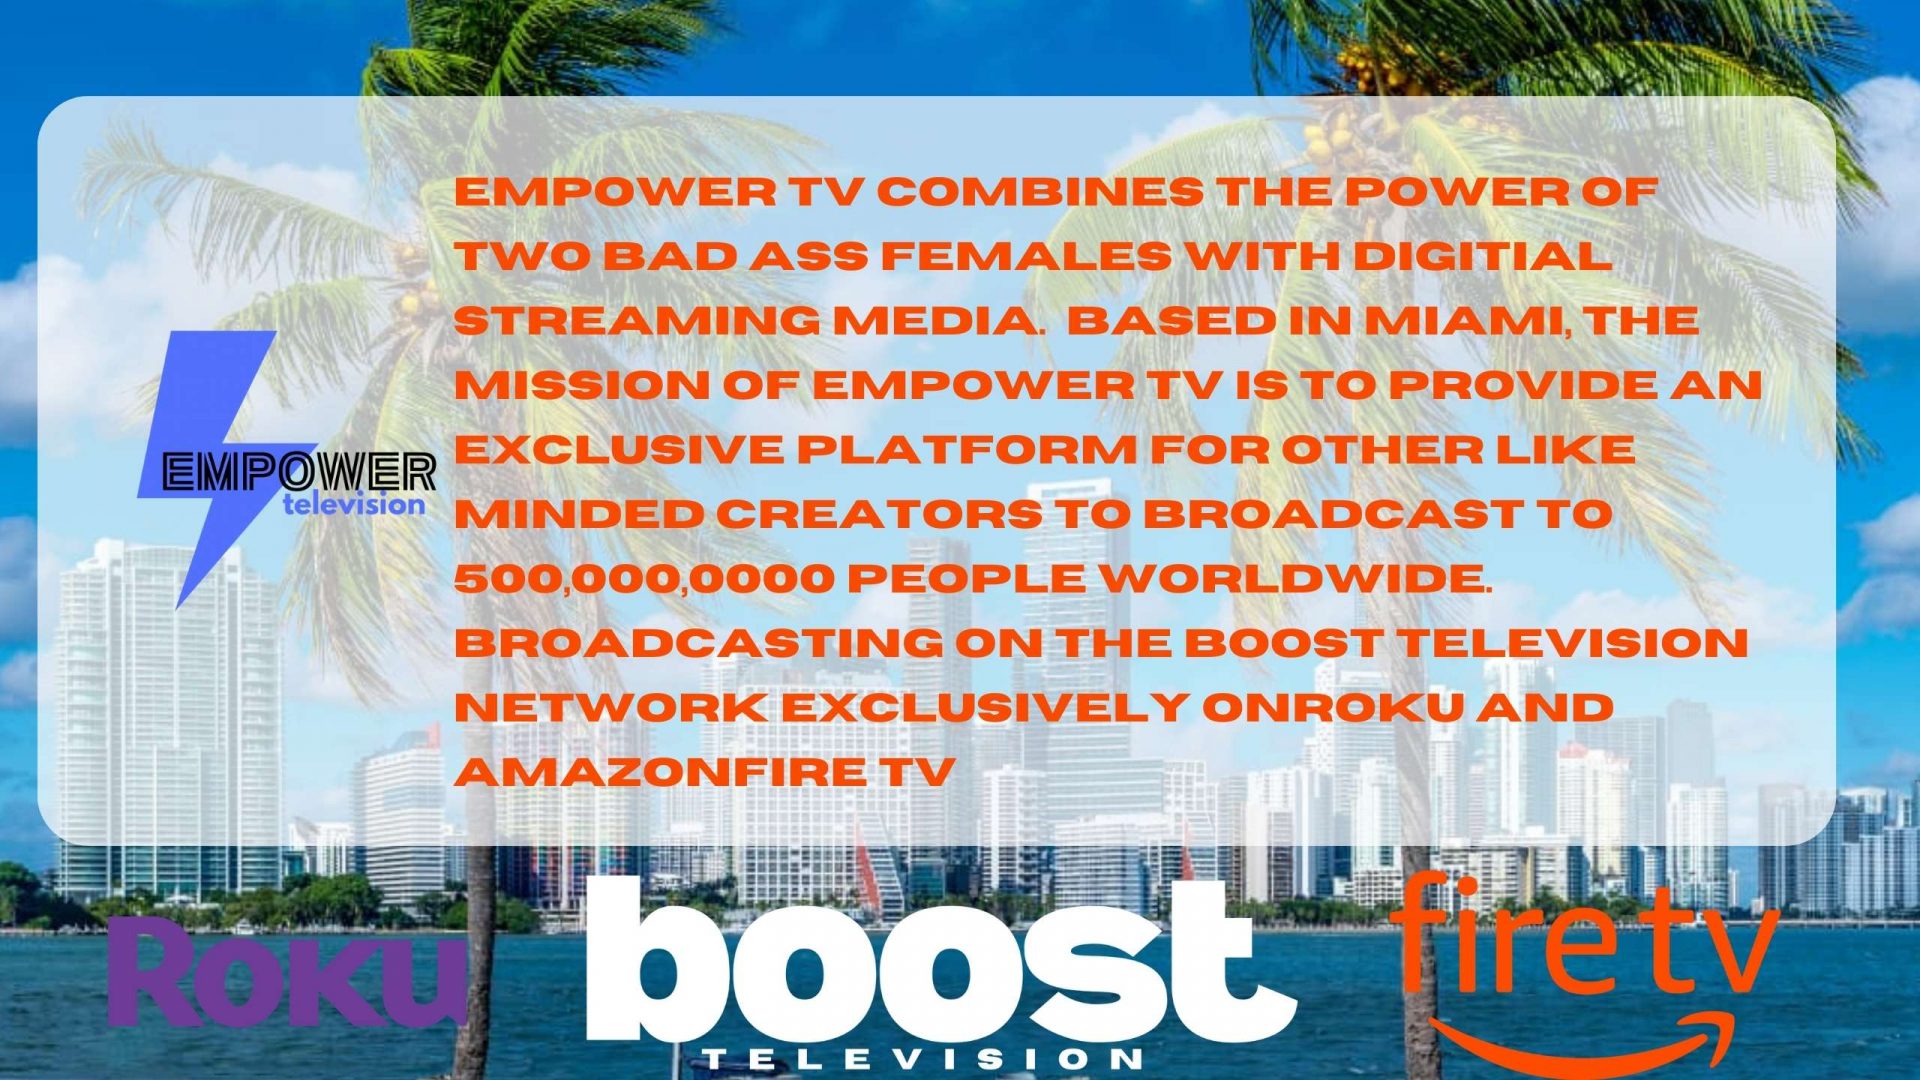 WHAT IS EMPOWER TV?